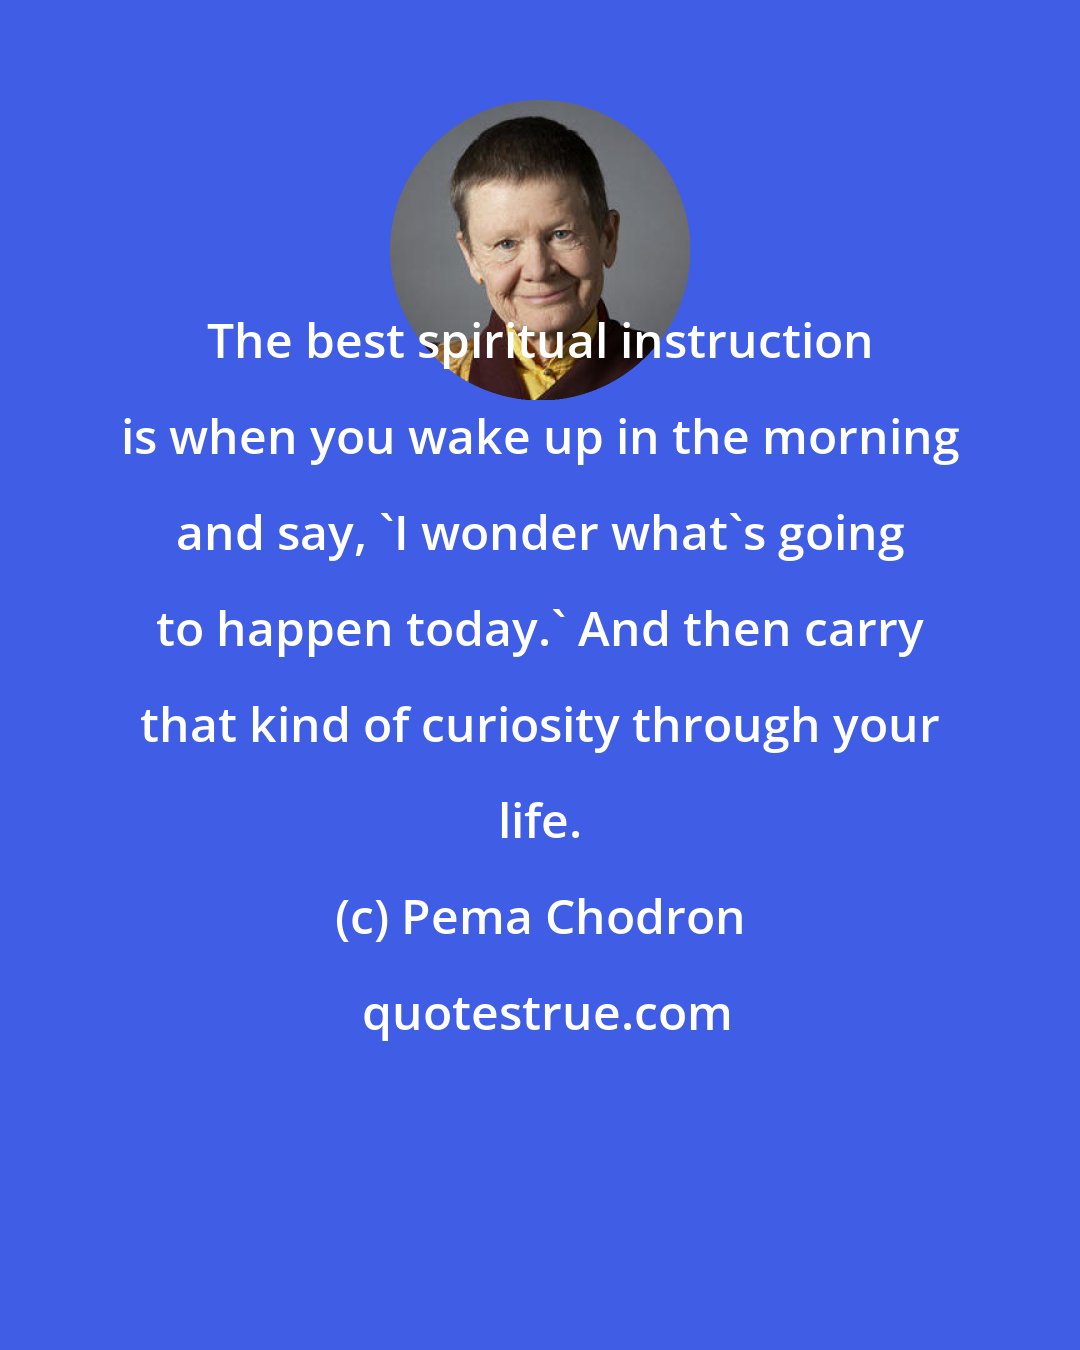 Pema Chodron: The best spiritual instruction is when you wake up in the morning and say, 'I wonder what's going to happen today.' And then carry that kind of curiosity through your life.